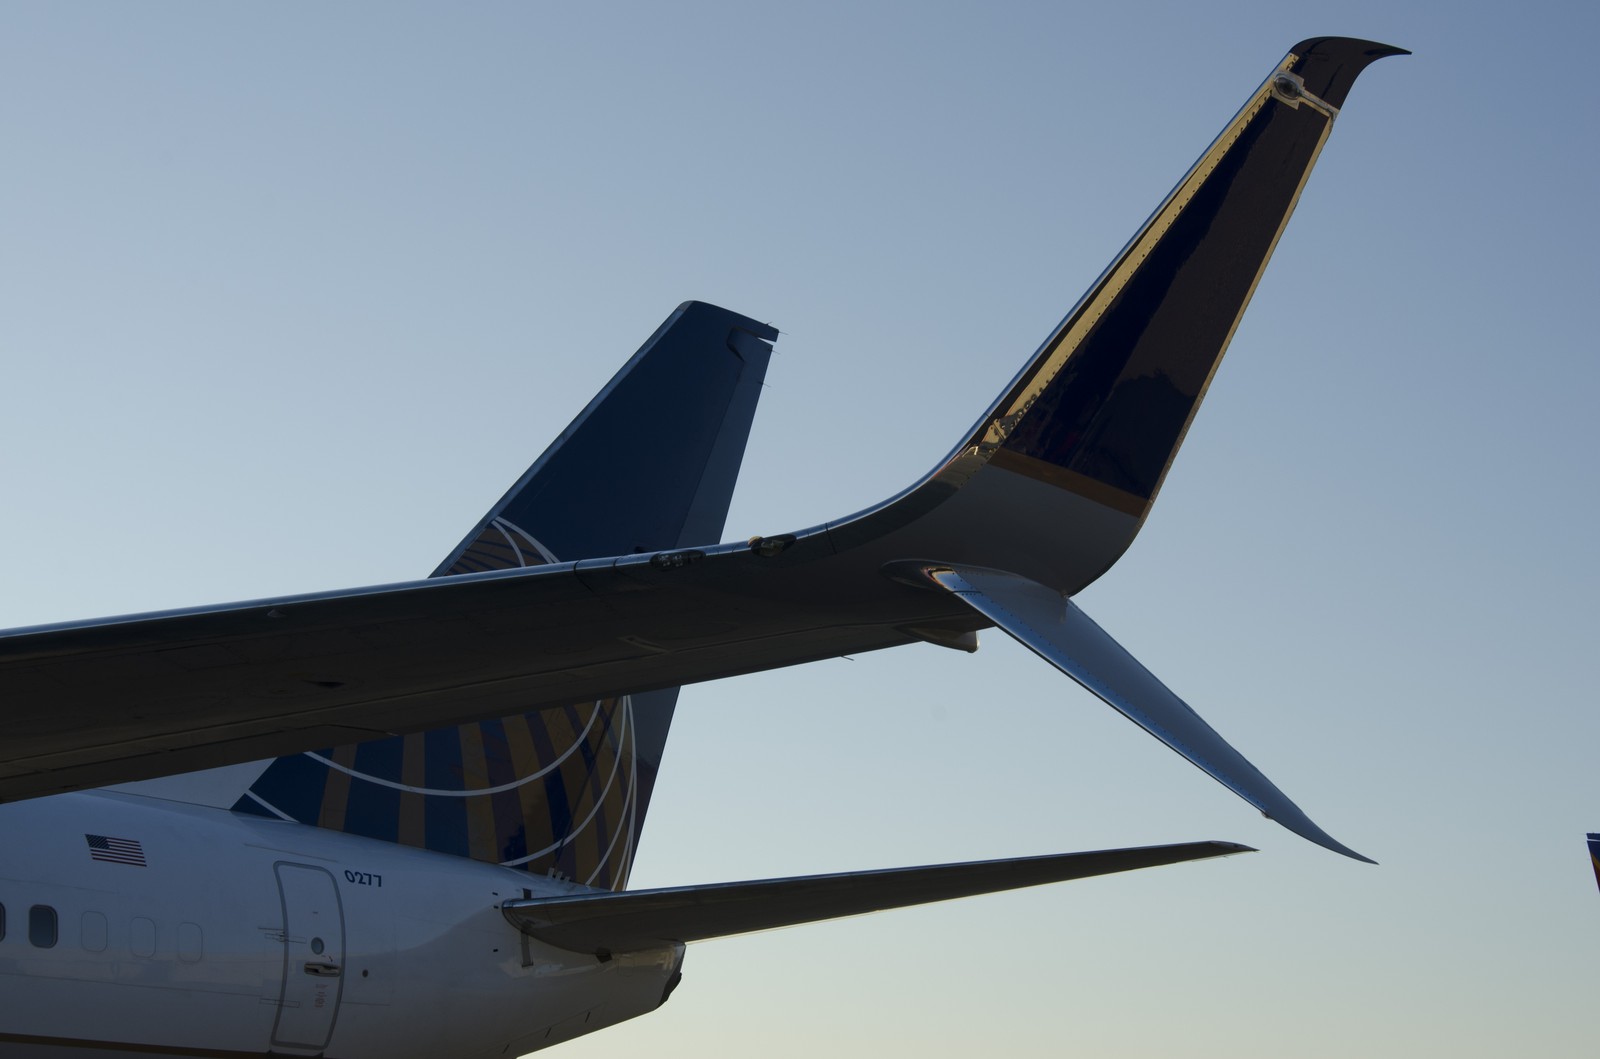 How These Simple Scimitar Winglets Make The 737 A Whole New Plane